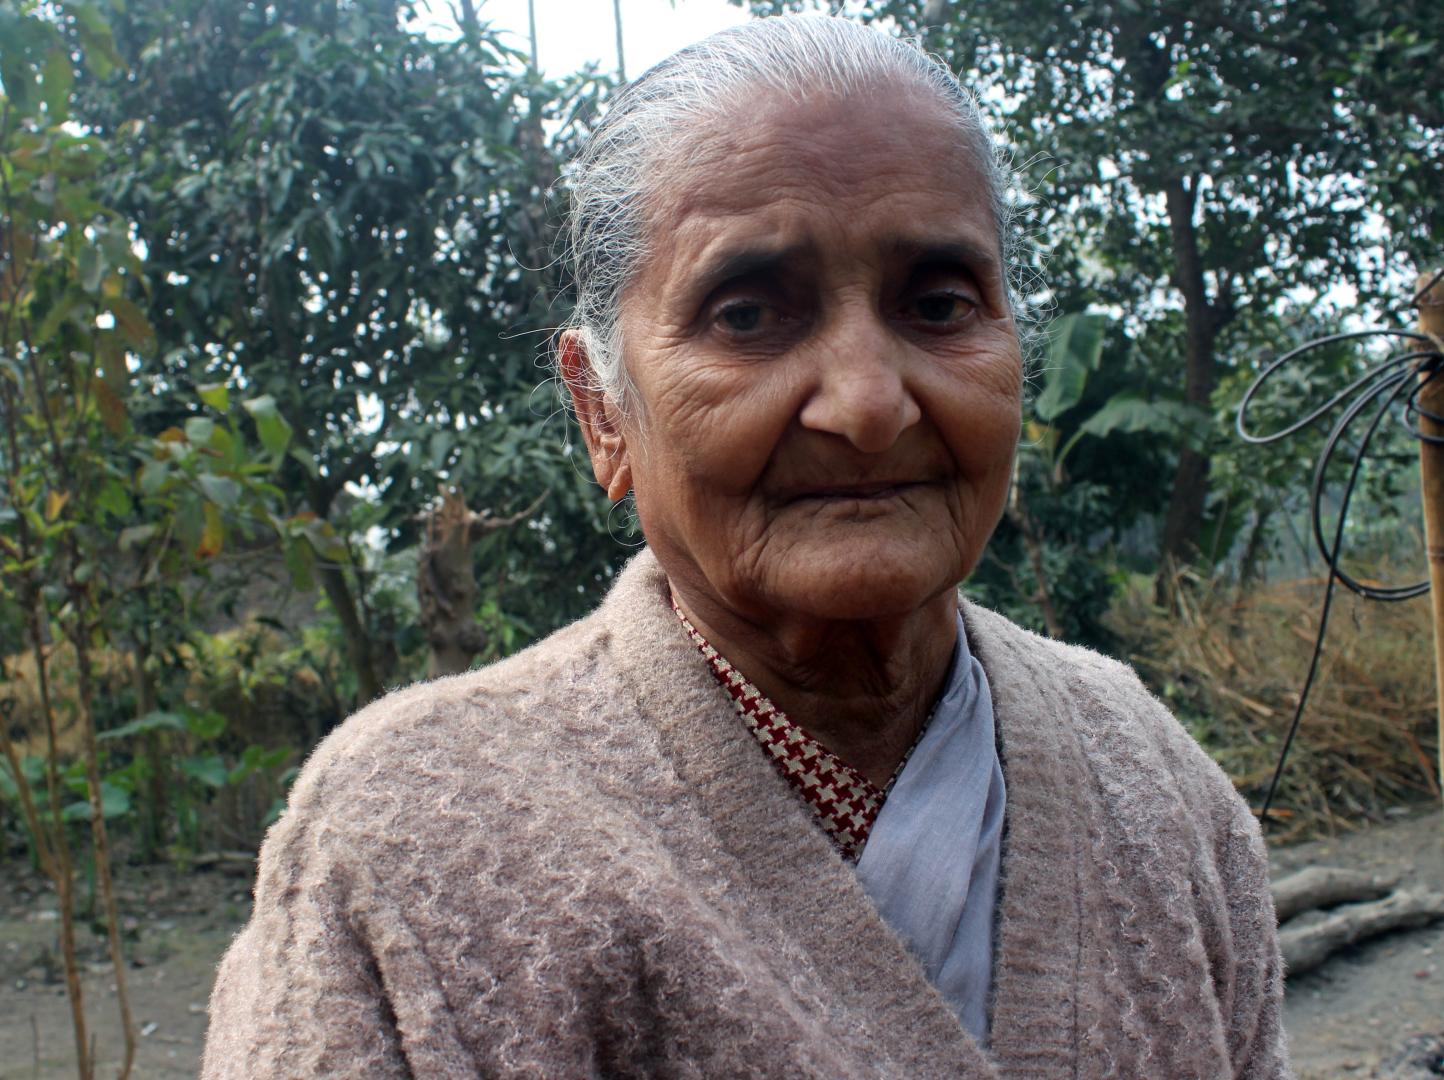 Ratna Khawas has worked for decades to ensure that everyone in her village in Belbari, Nepal has access to toilets.